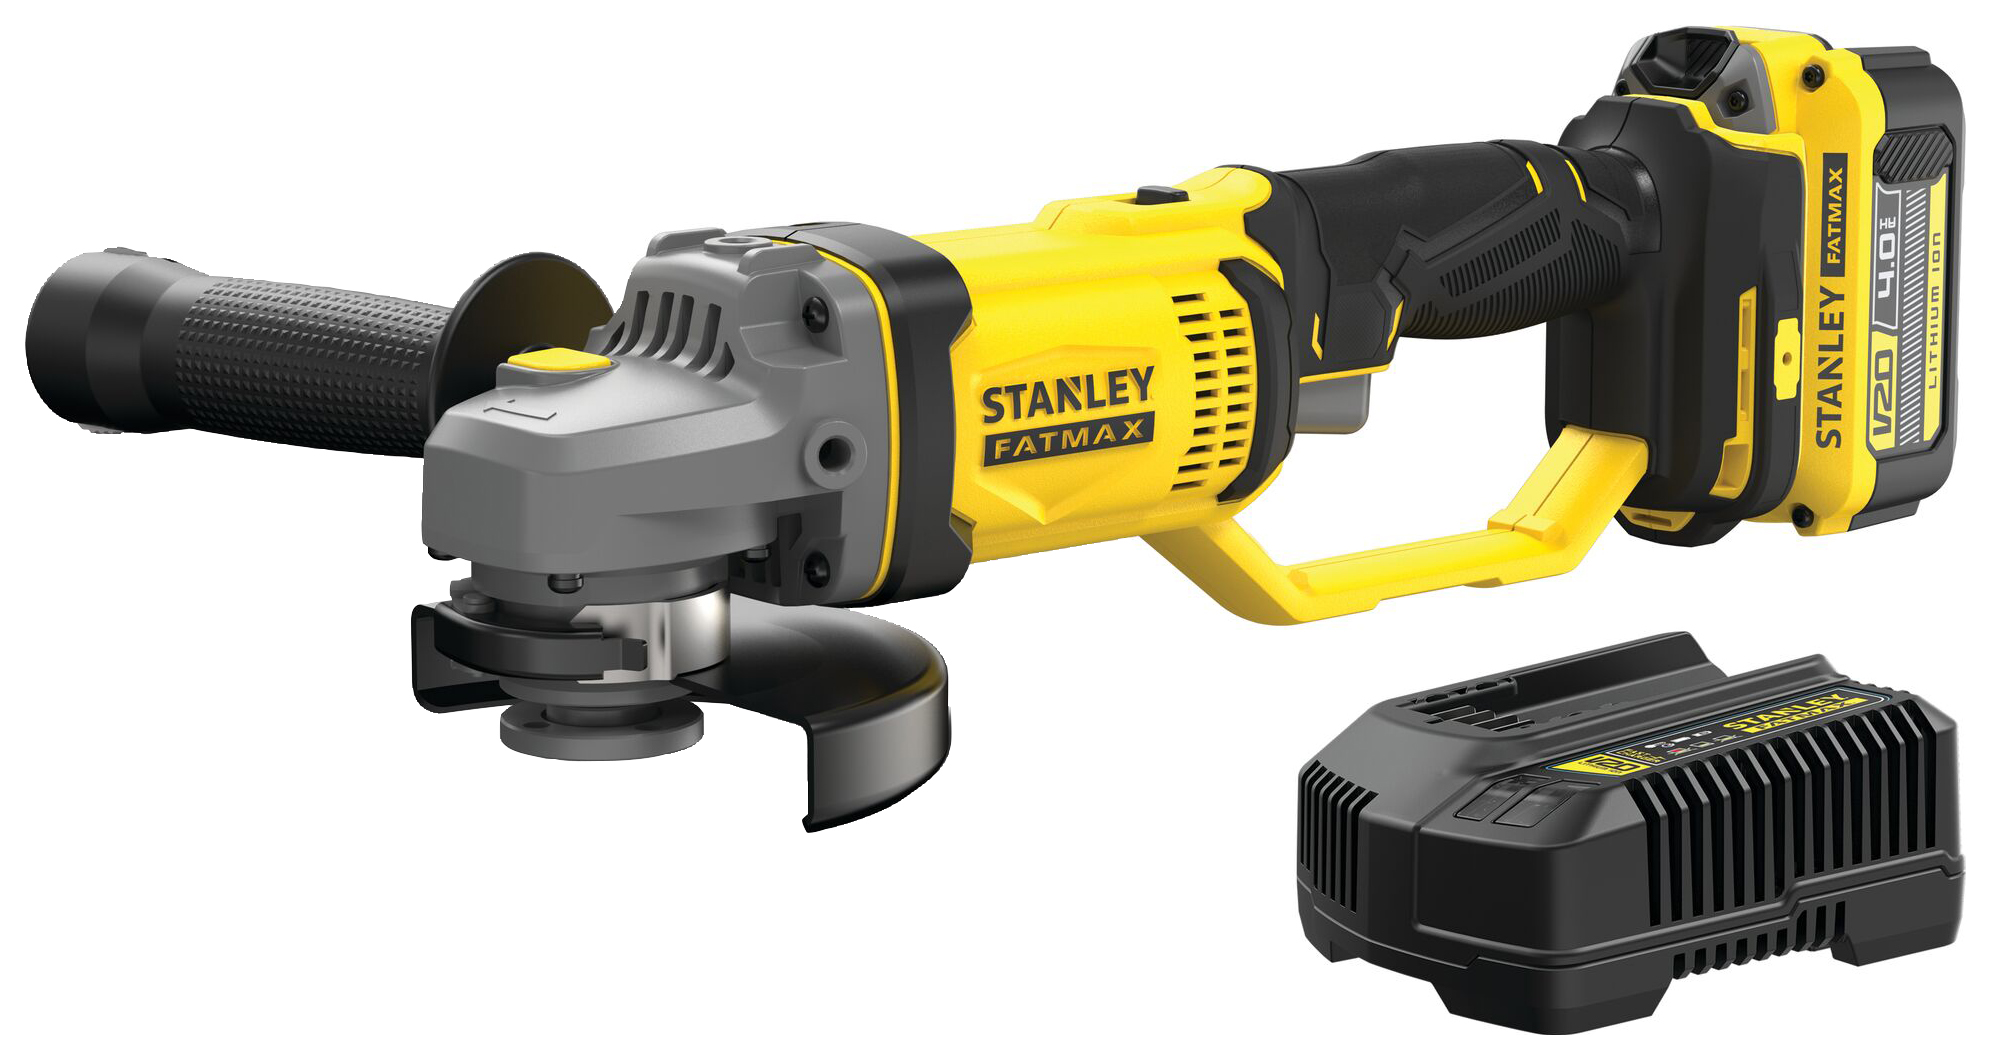 Image of Stanley FatMax® V20 SFMCG400m1K-GB 18V 1 x 4.0AH Cordless 125mm Angle Grinder with Kitbox